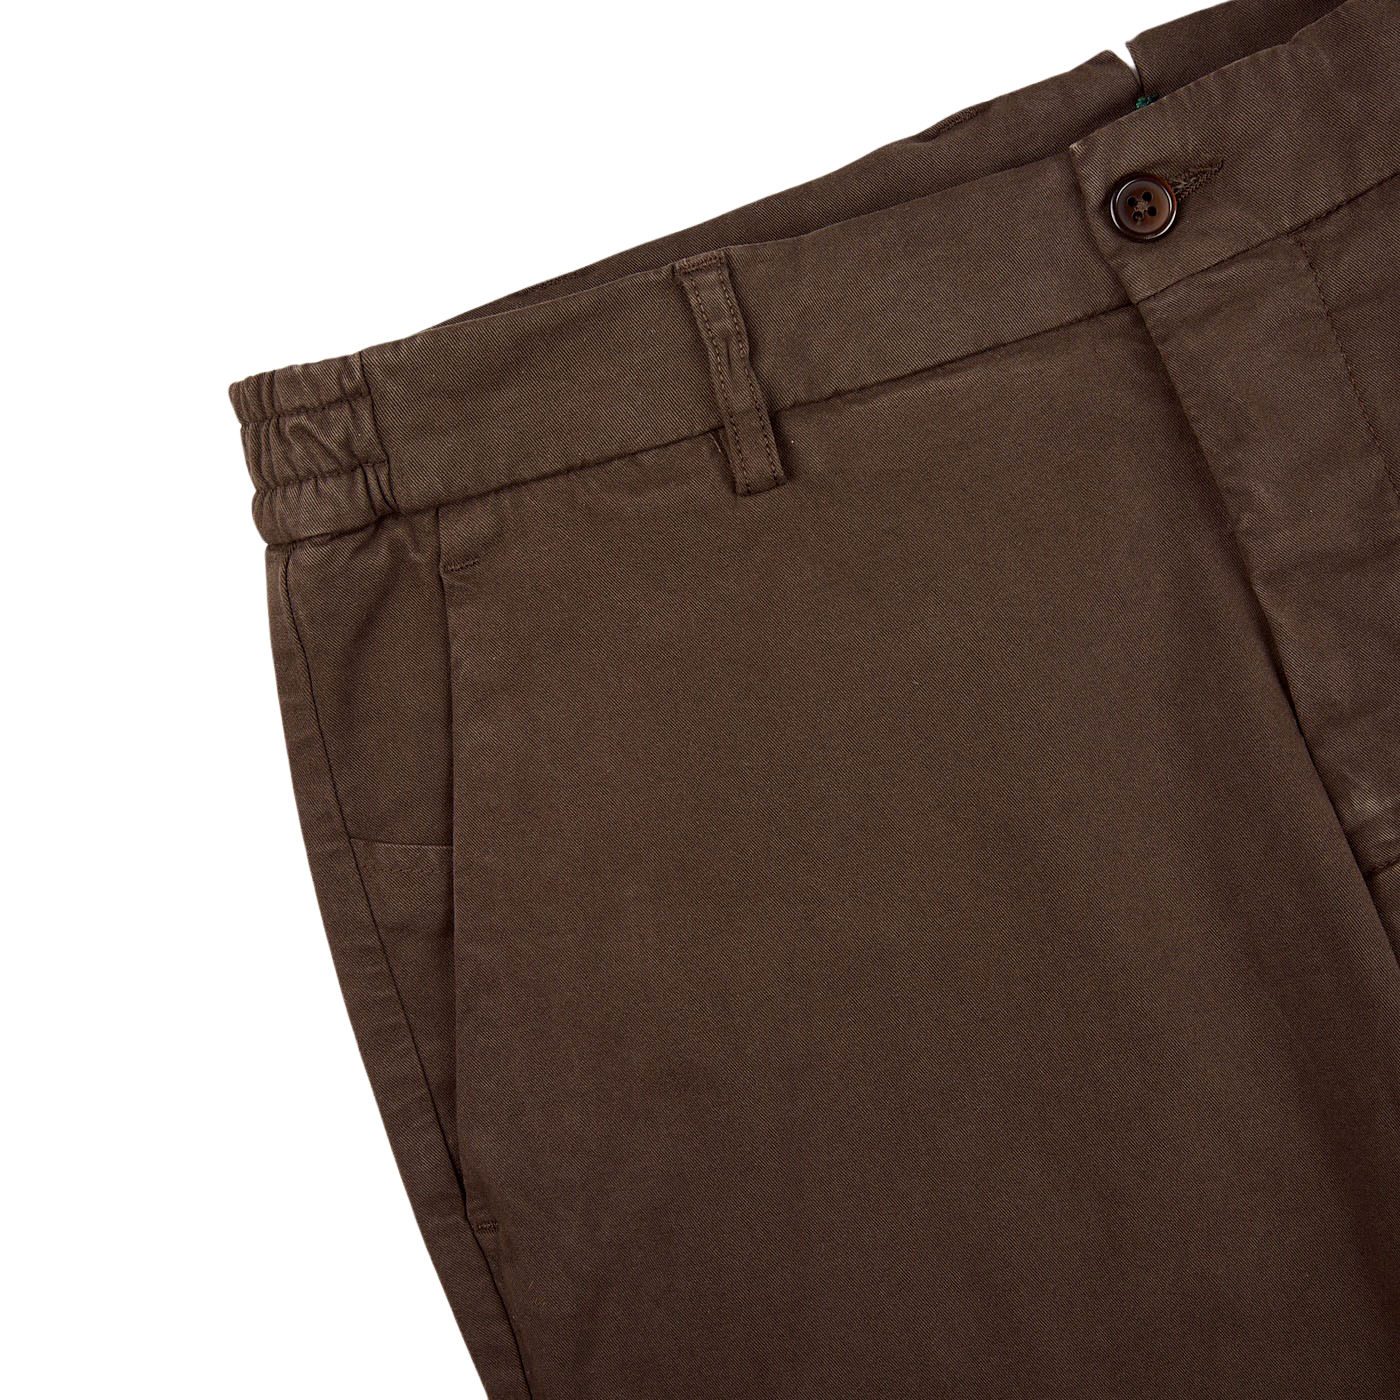 A close up of a slim fit pair of Berwich Dark Brown Cotton Stretch Chinos.